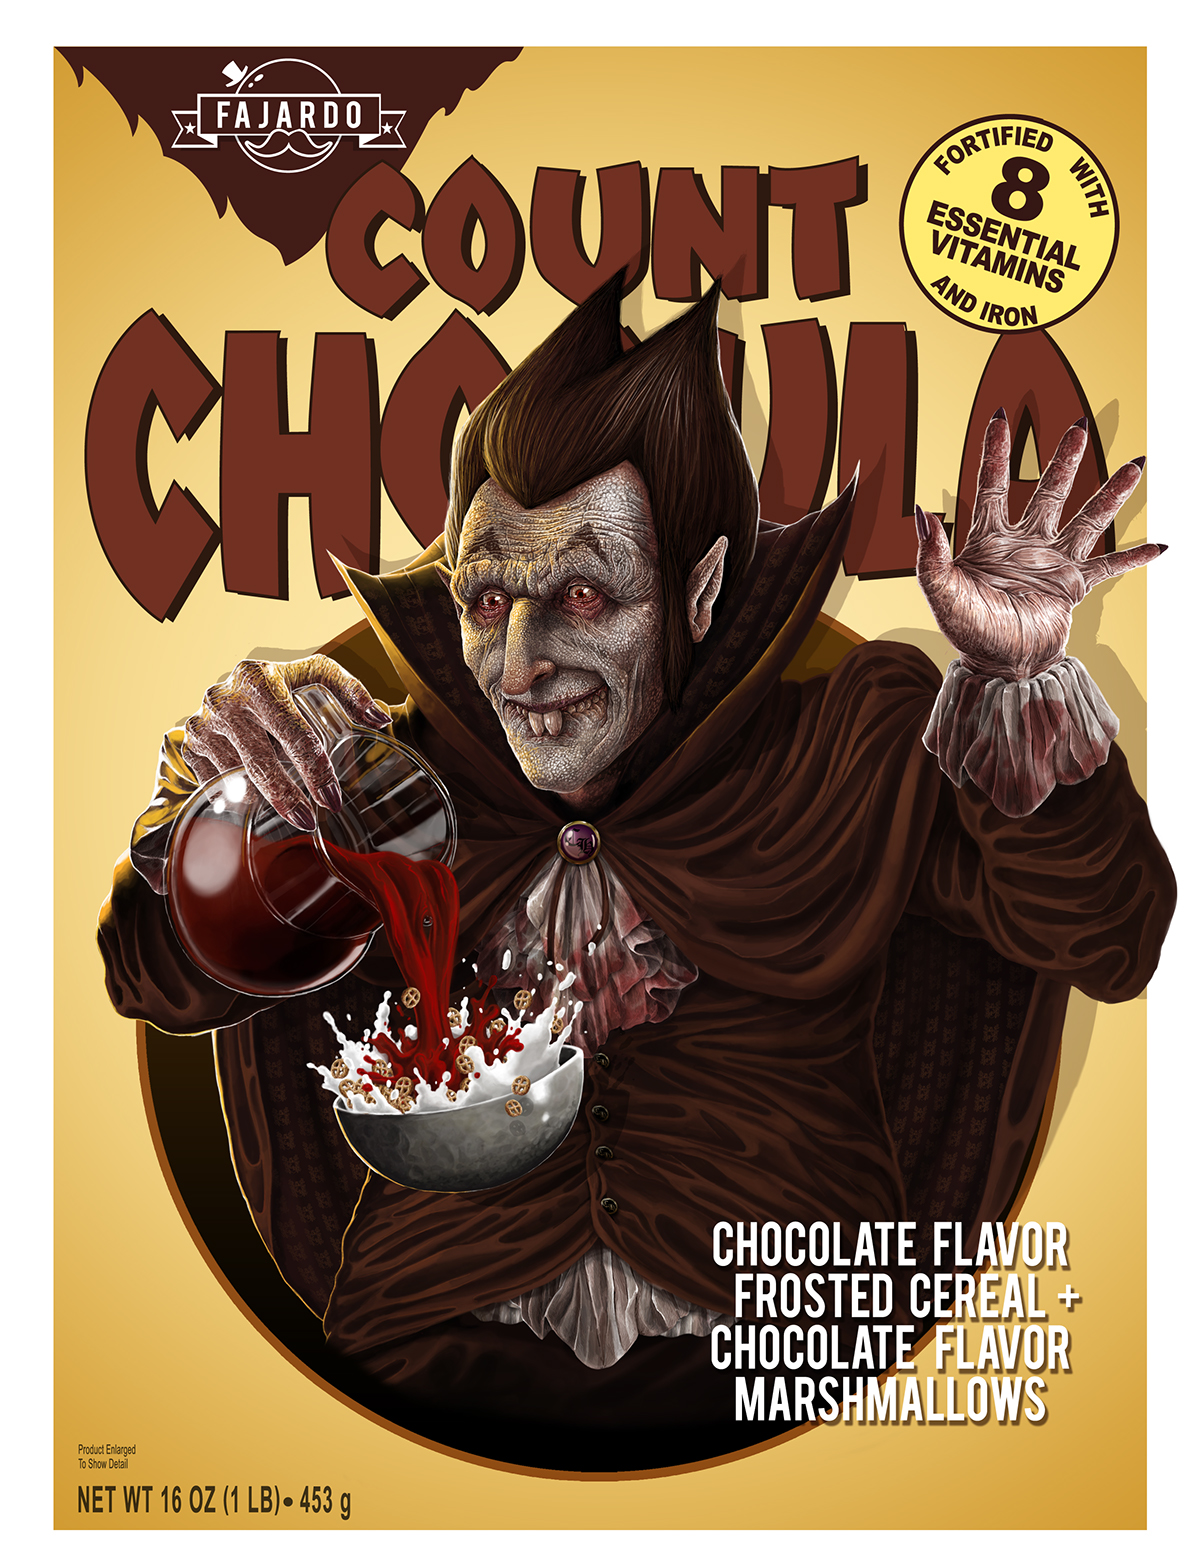 photoshoot photgraphy photoshop Cereal series breakfast captain crunch Tony Trix count chocula jieying print